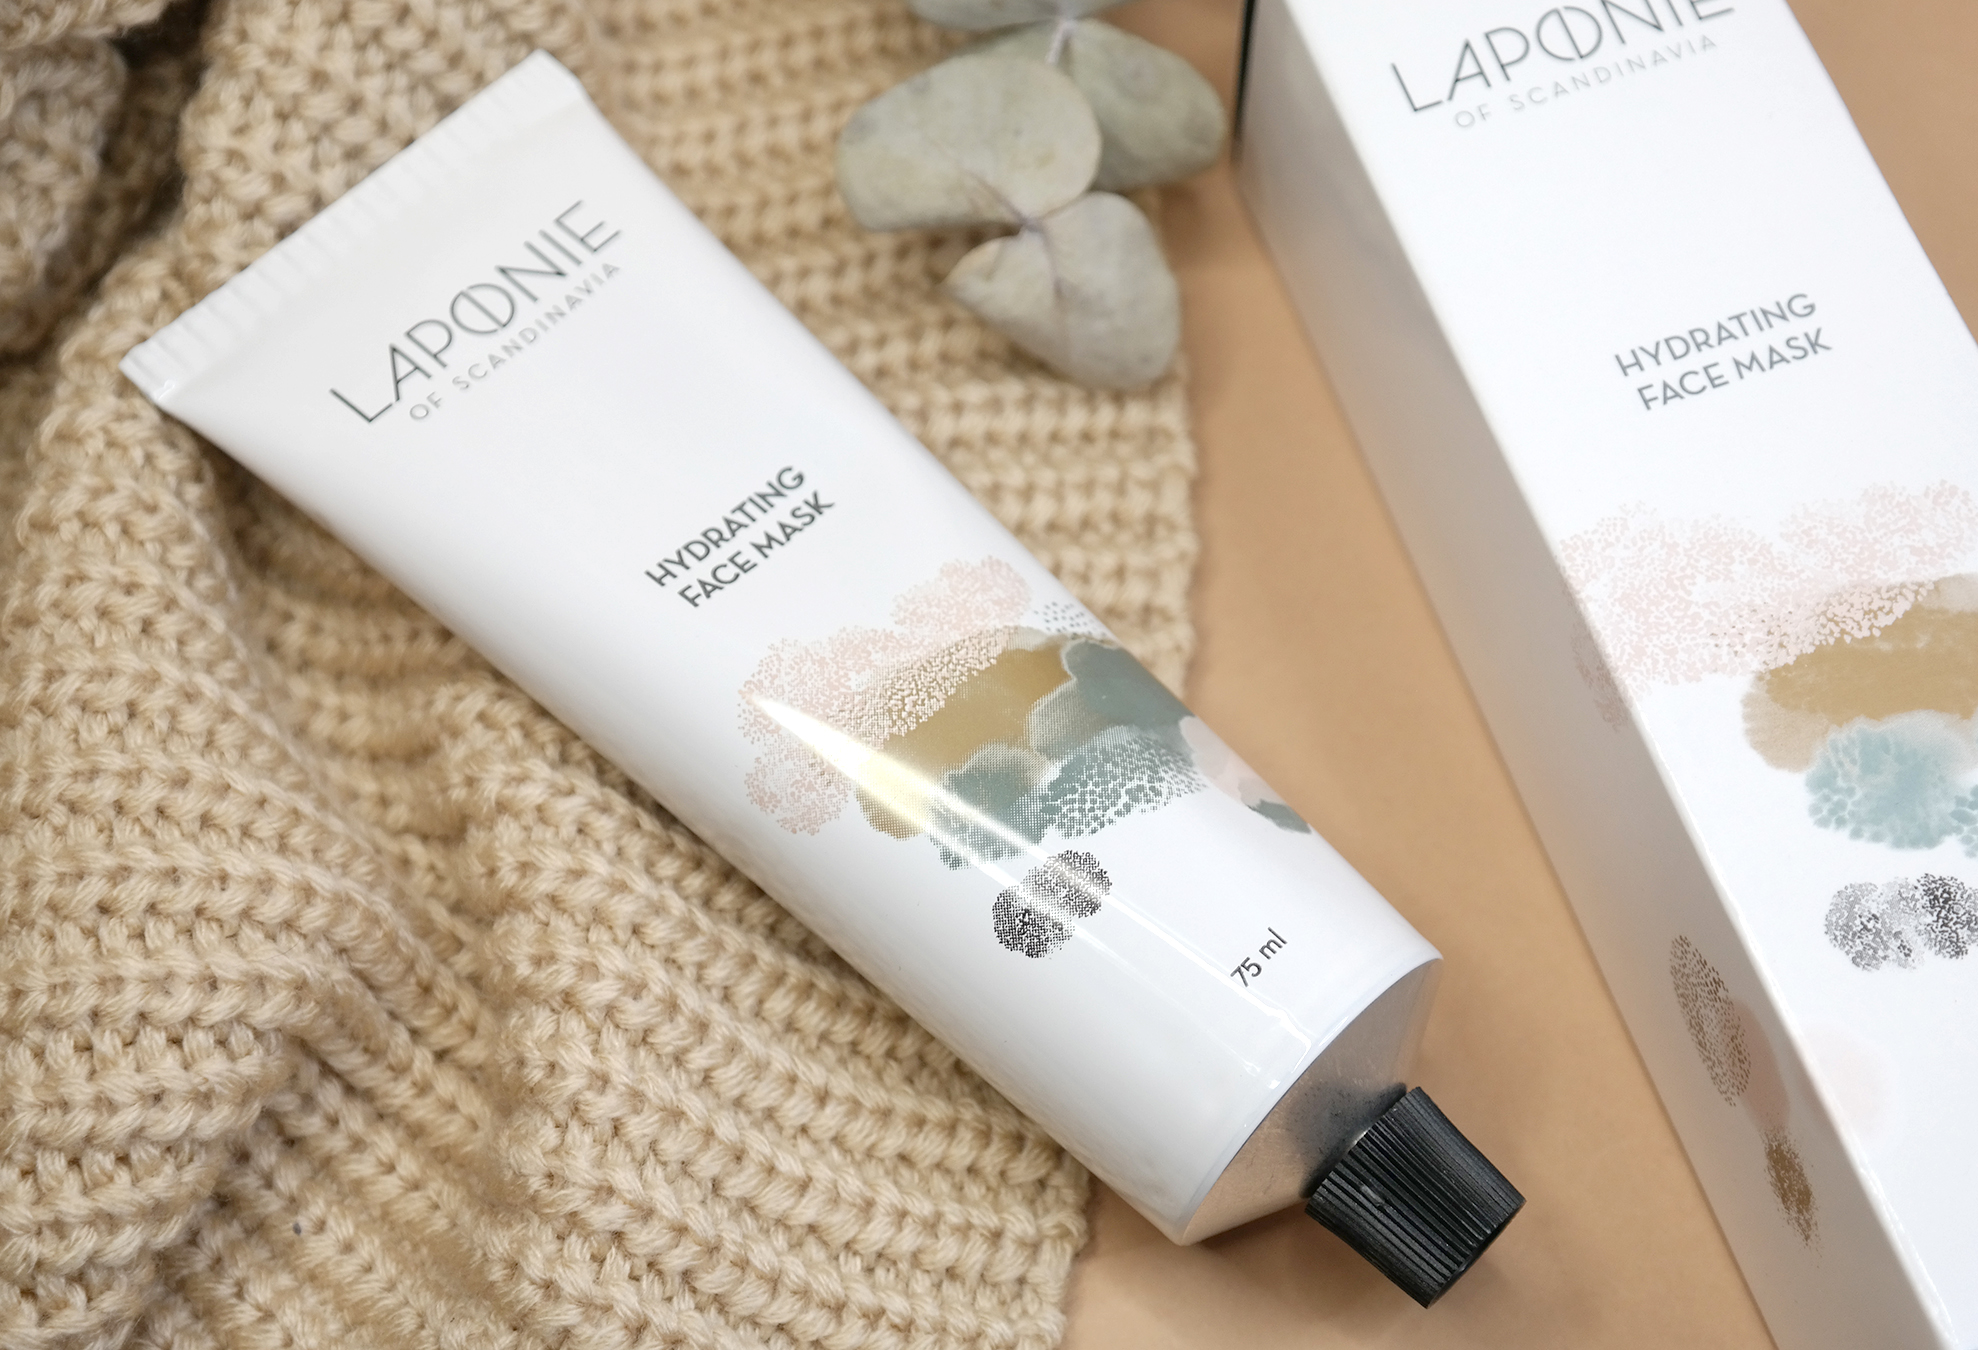 Laponie Hydrating Face Mask